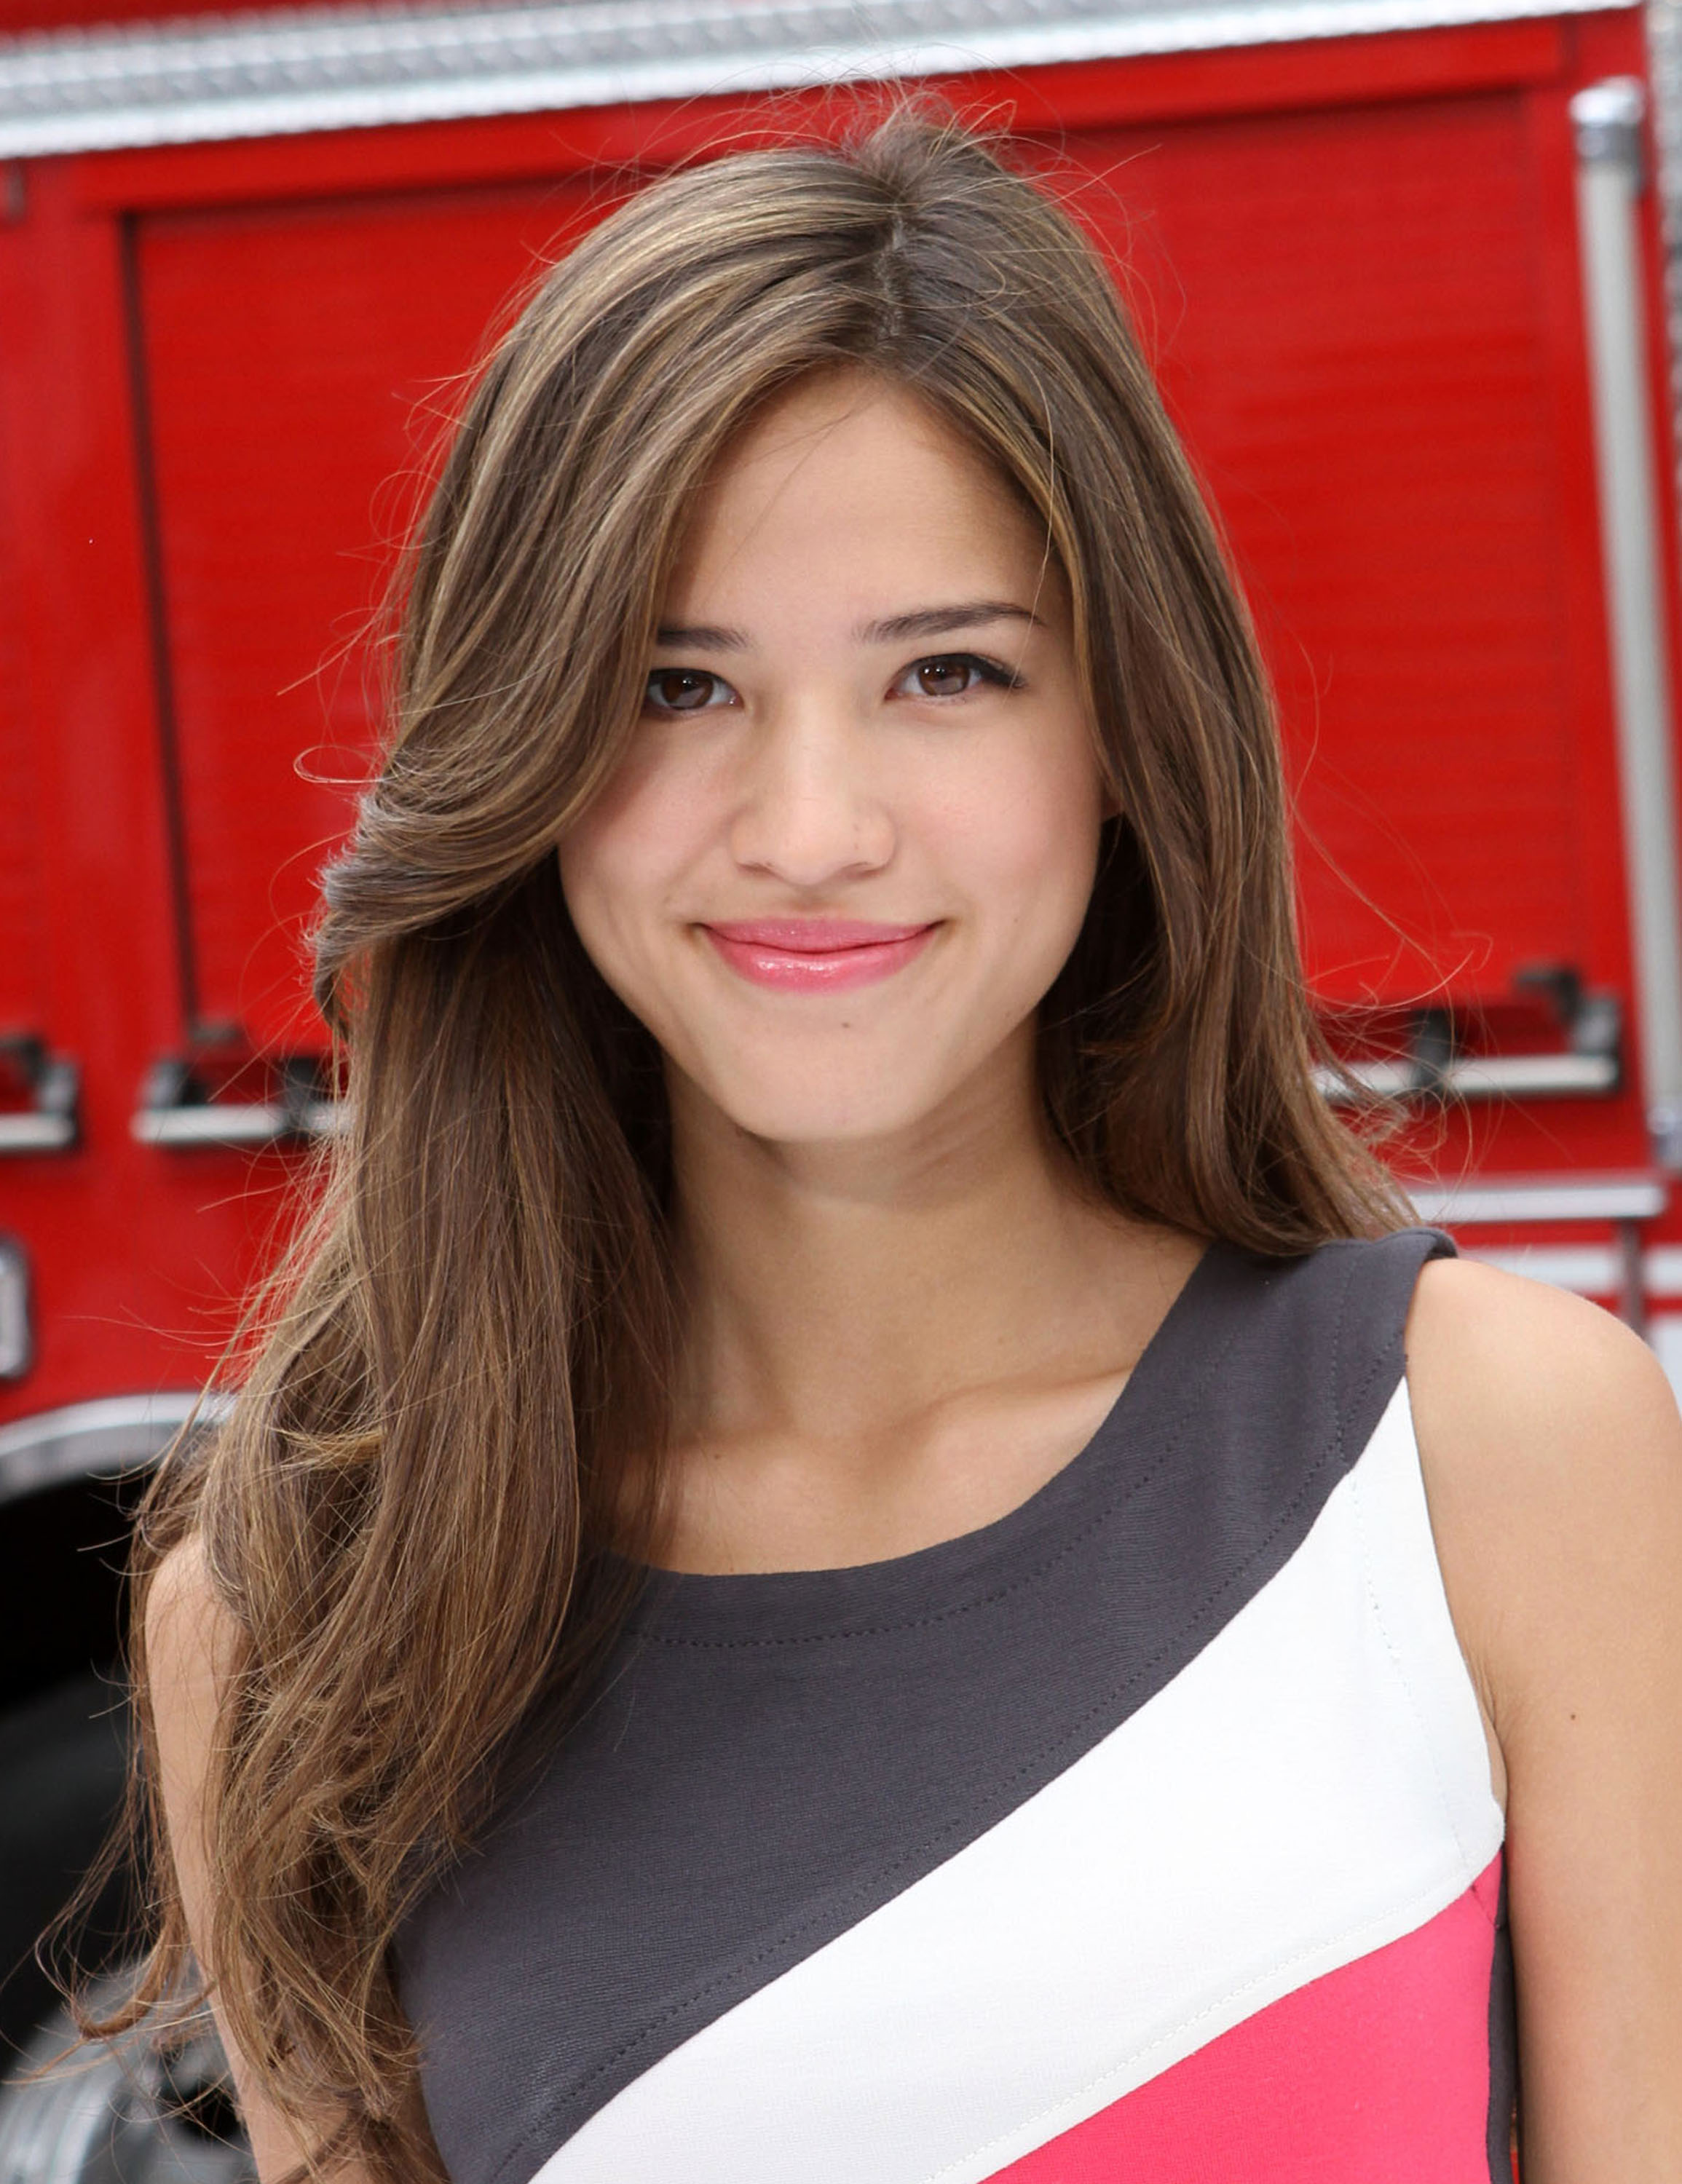 april stockman recommends kelsey chow bra size pic